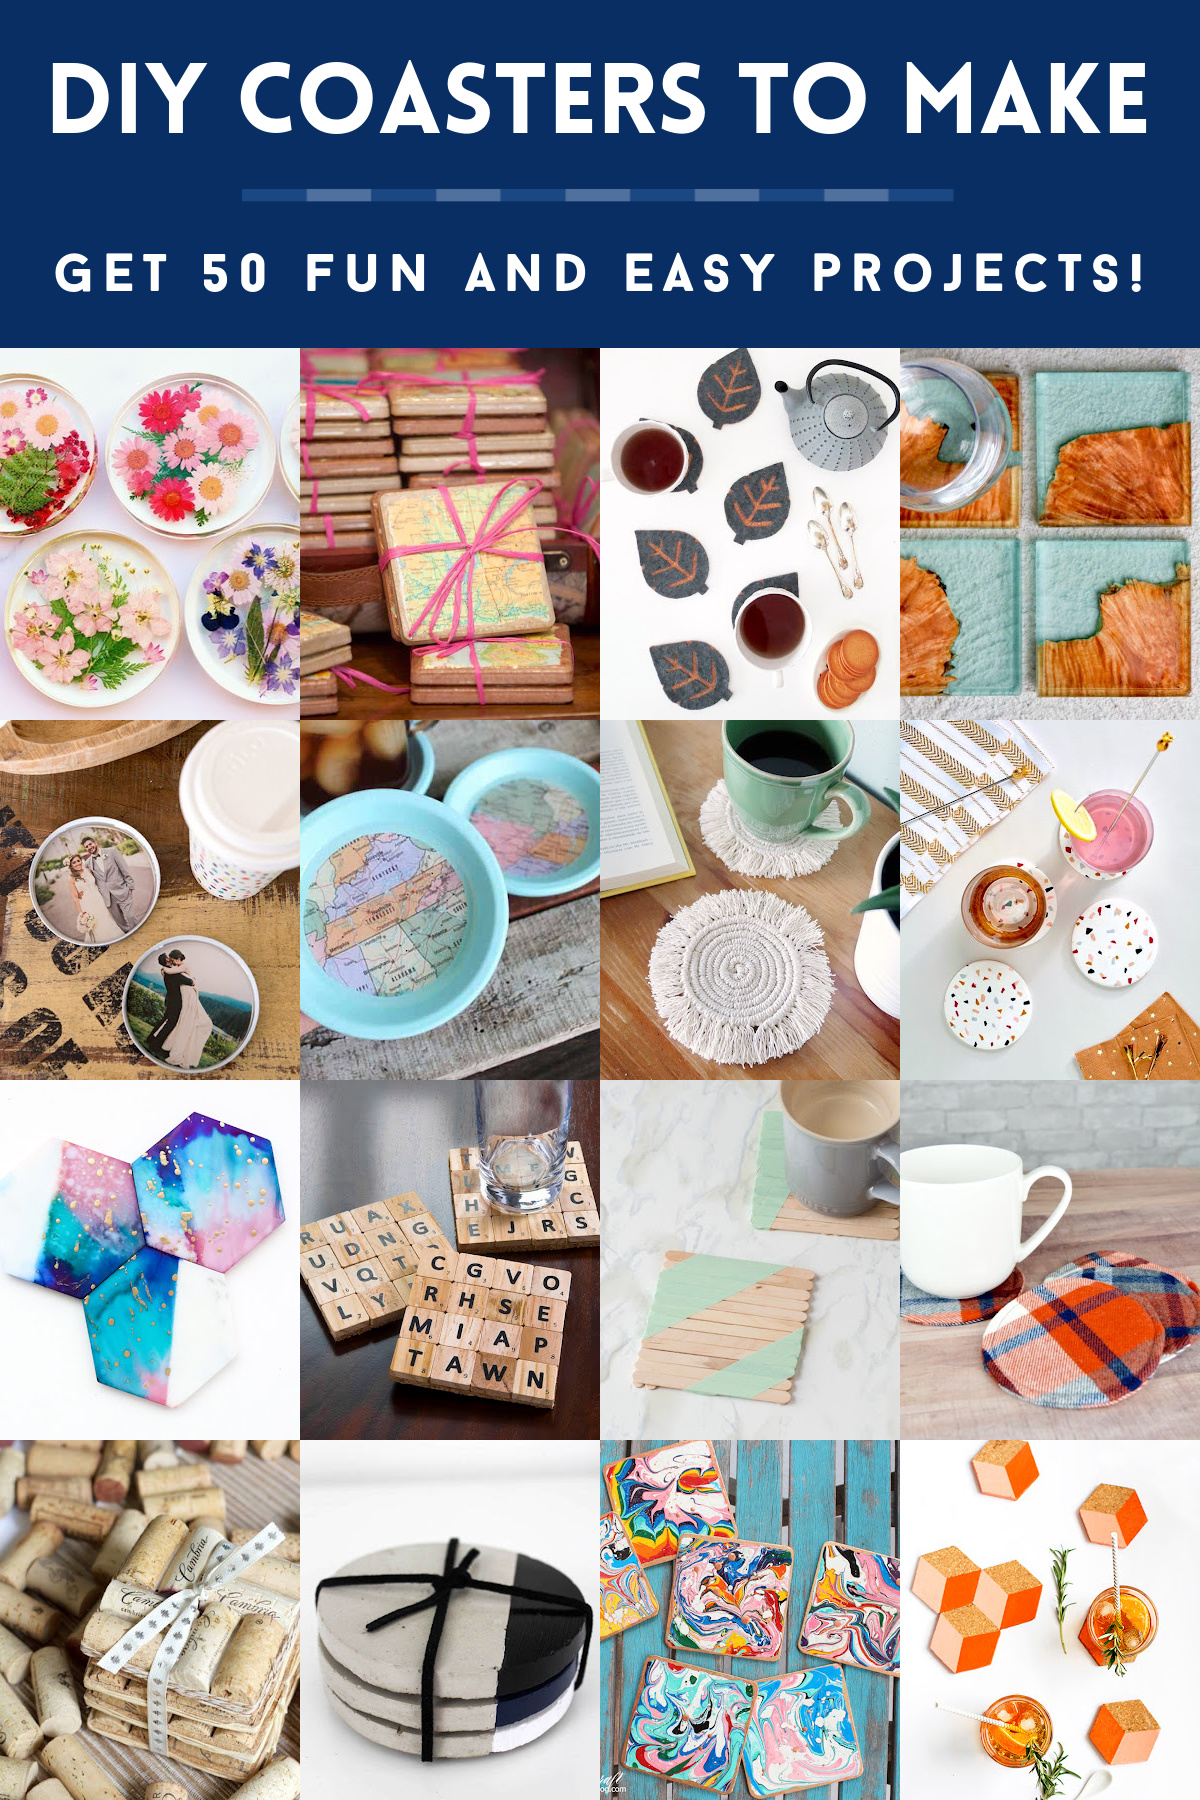 Hub More than anything two DIY Coasters: 50 Designs for Decor or Gifts! - Mod Podge Rocks